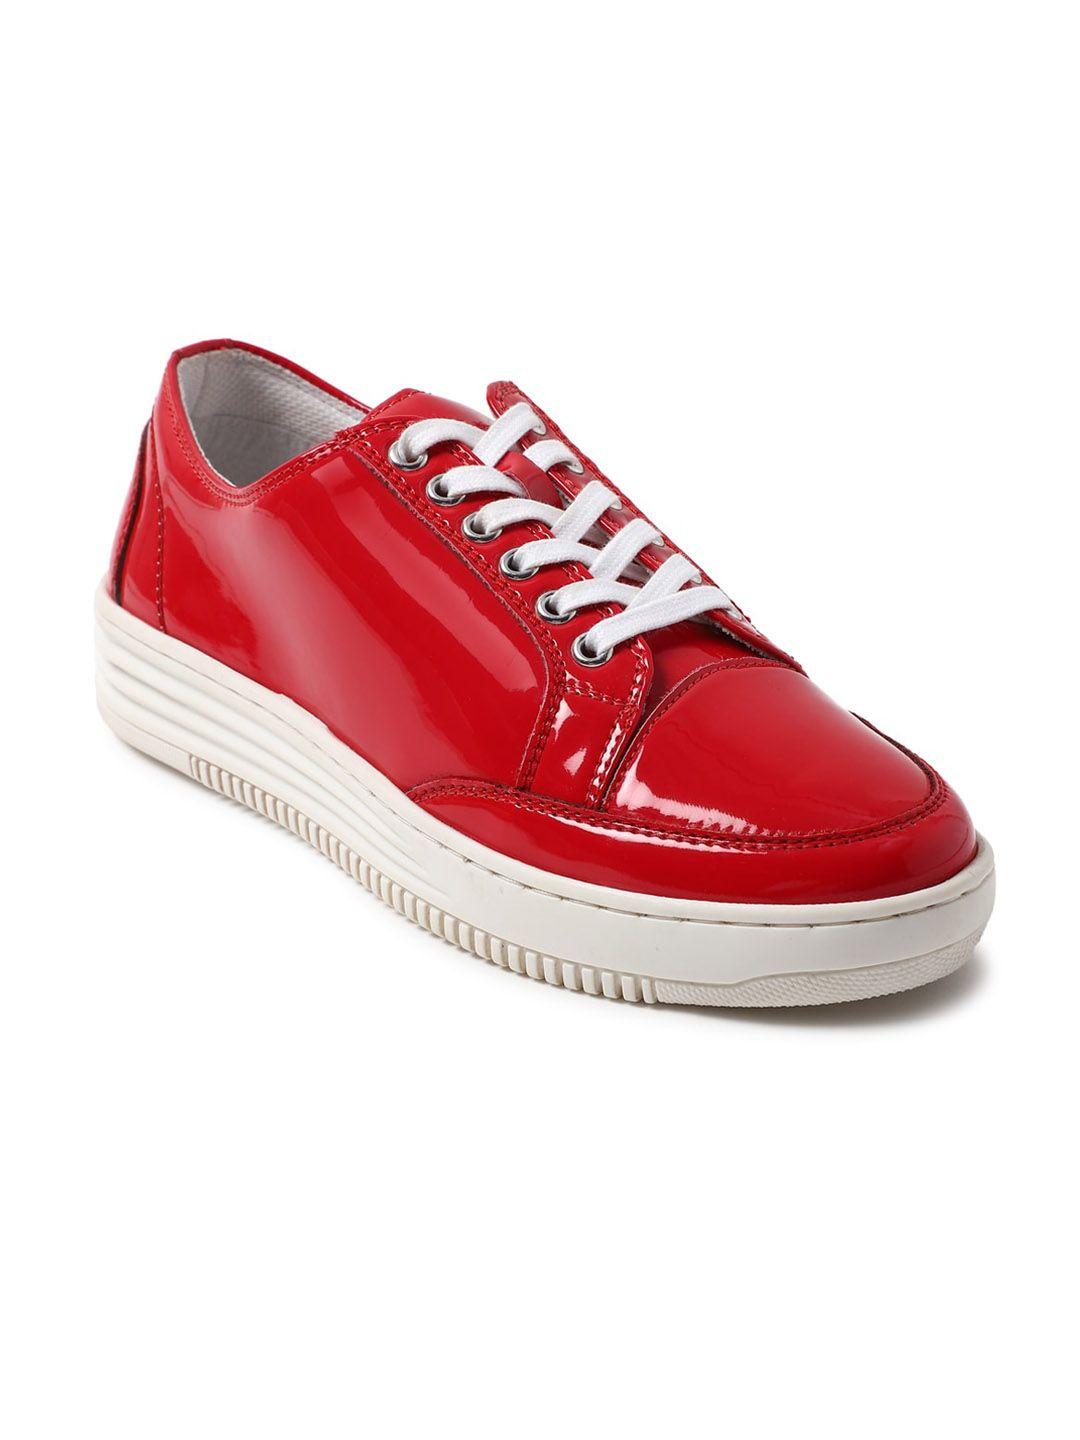 forever 21 women red pu lace-up sneakers